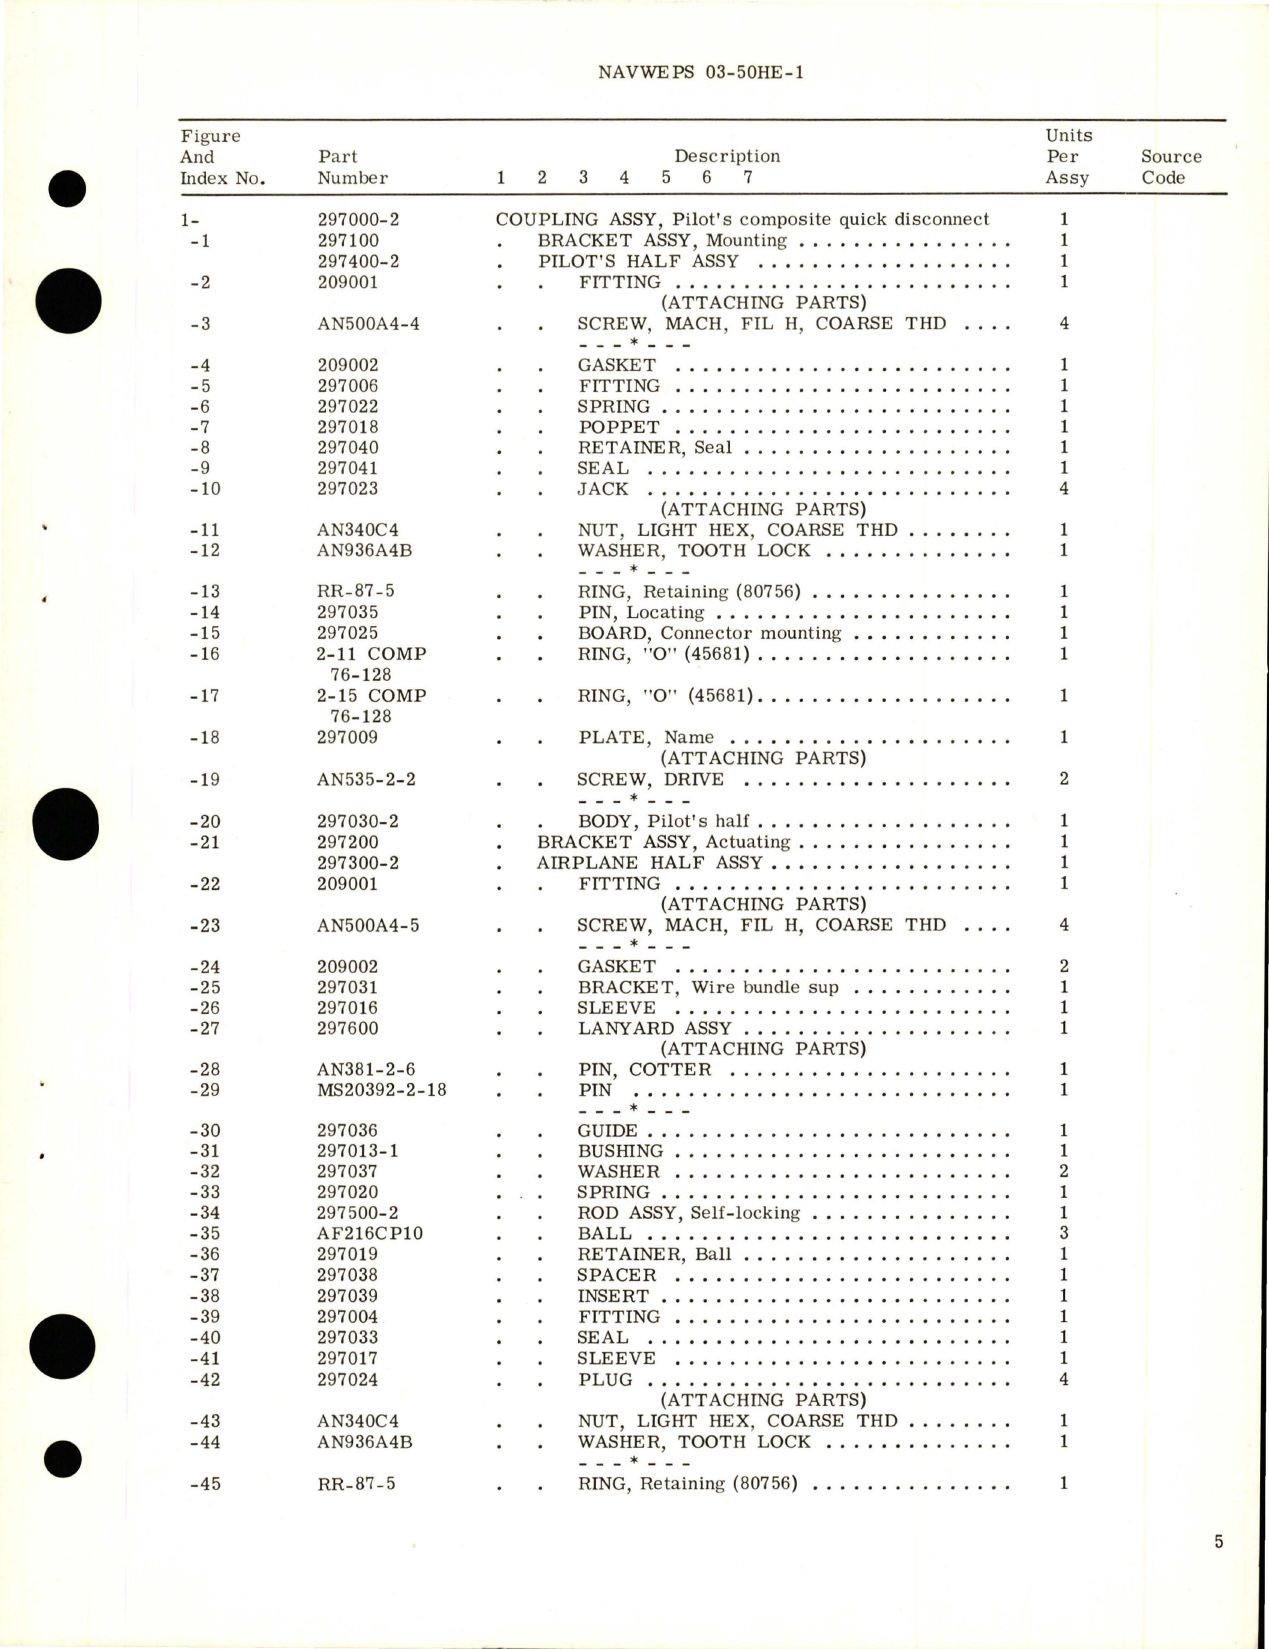 Sample page 5 from AirCorps Library document: Overhaul Instructions with Parts Breakdown for Pilot's Quick Disconnect Coupling - Part 297000-2